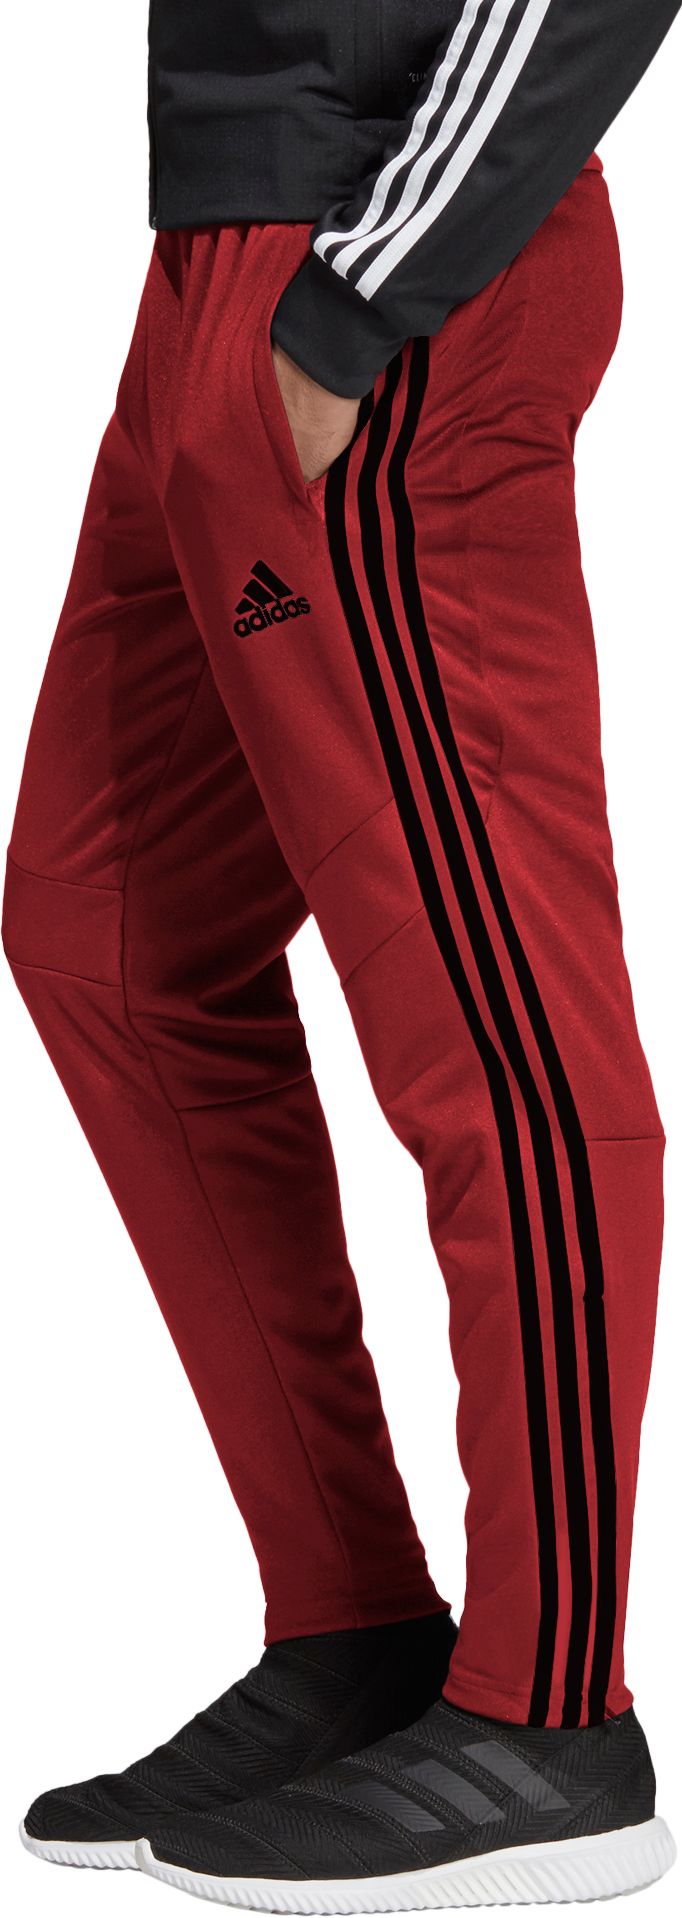 adidas youth tapered soccer pants